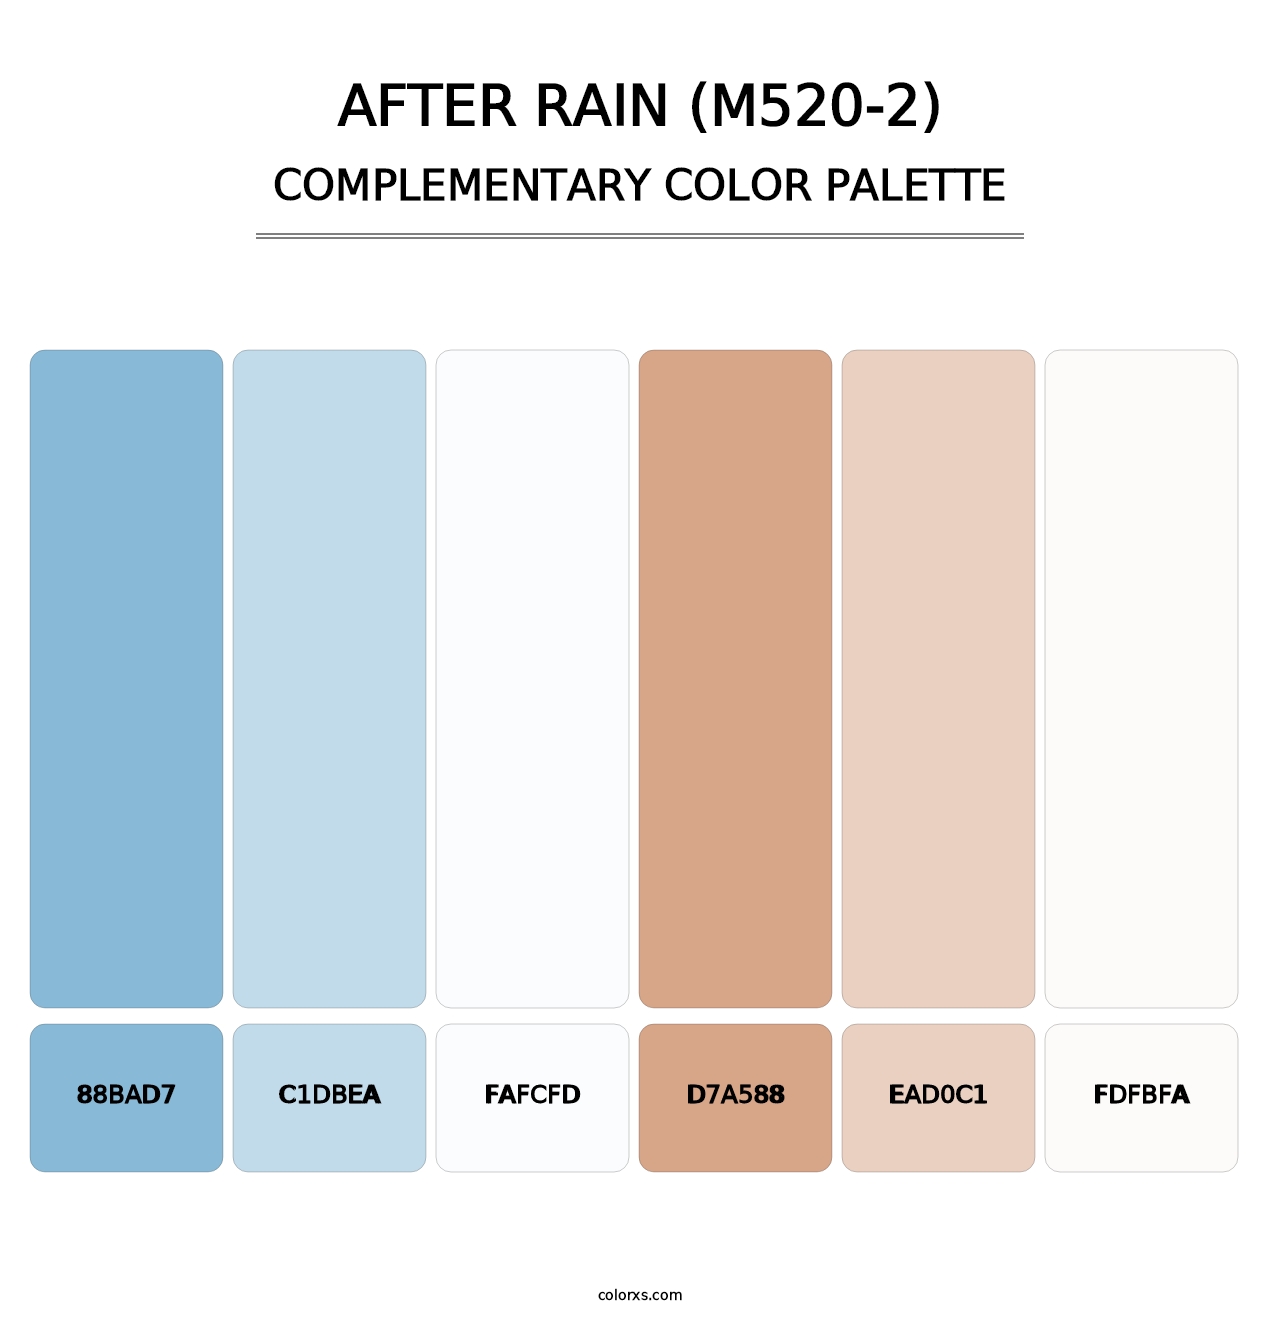 After Rain (M520-2) - Complementary Color Palette